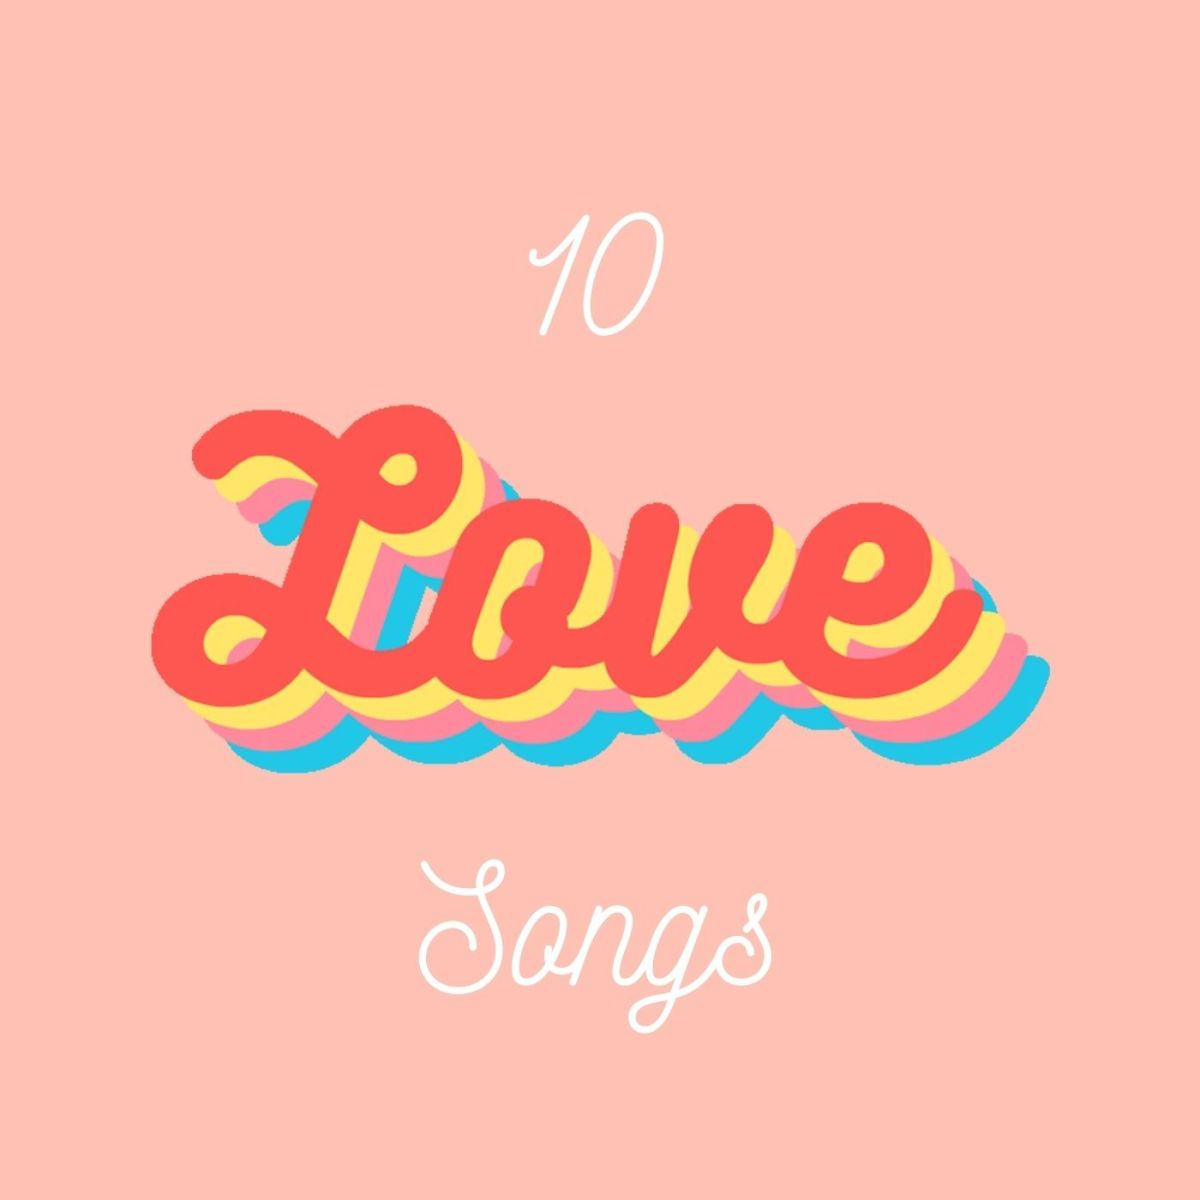 These 10 songs will transport you back to a love-filled era of your life.